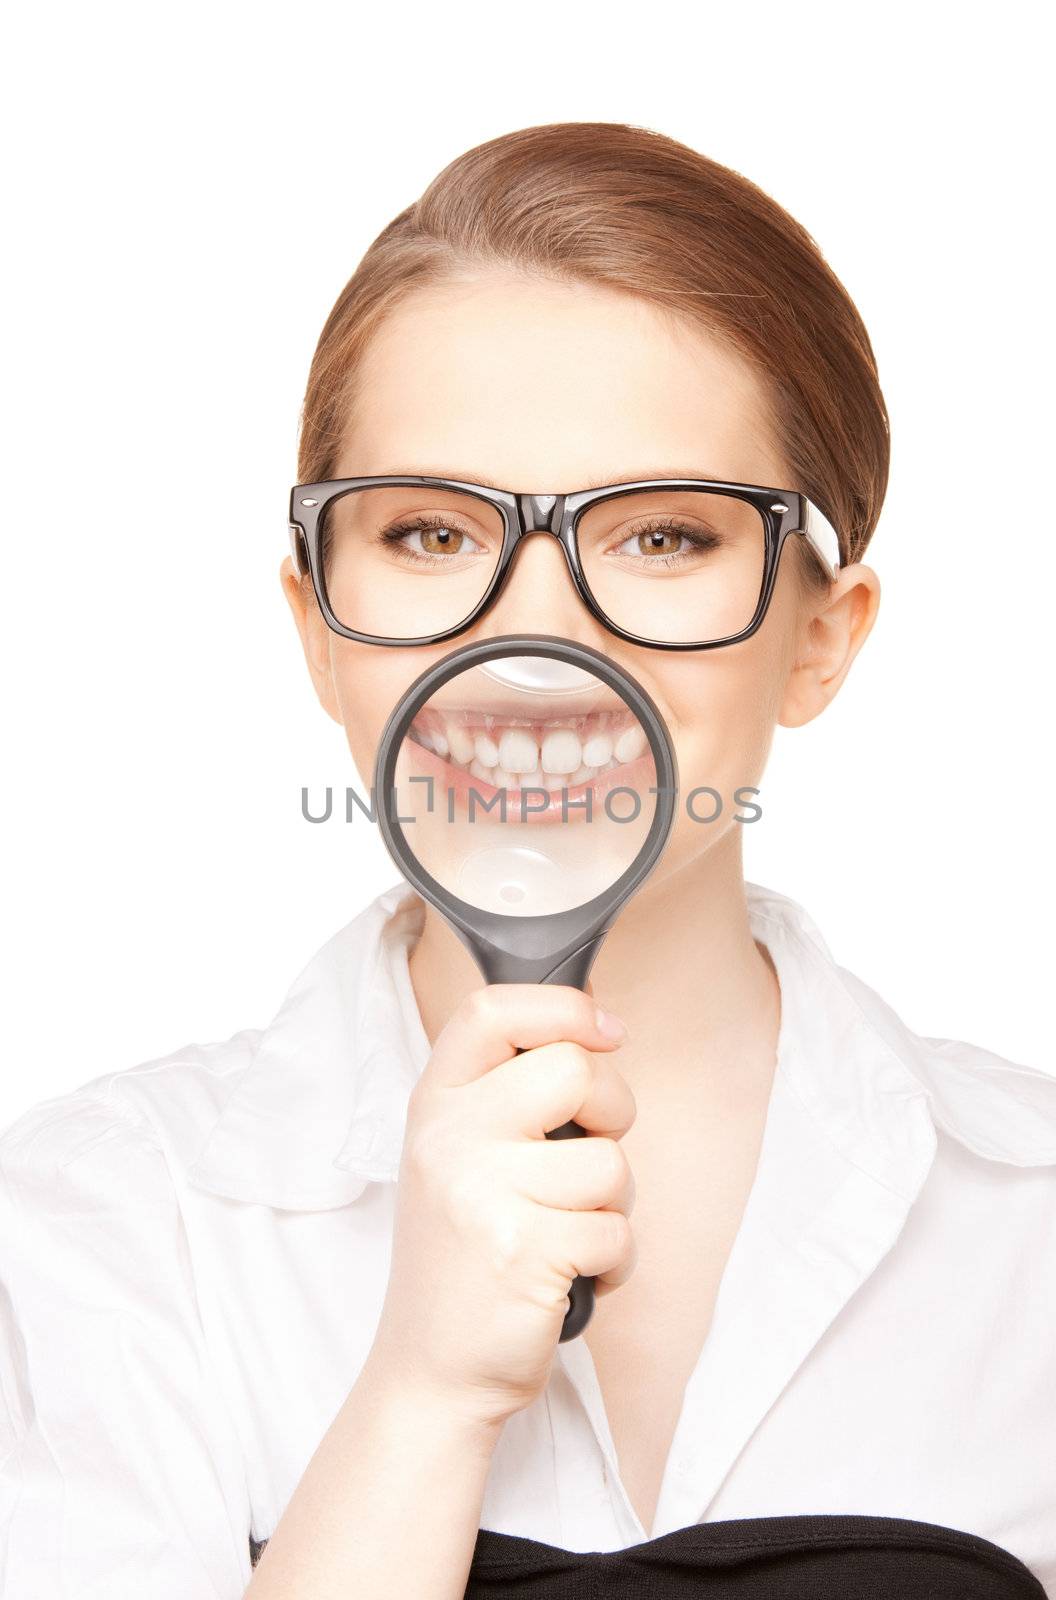 woman with magnifying glass showing teeth by dolgachov